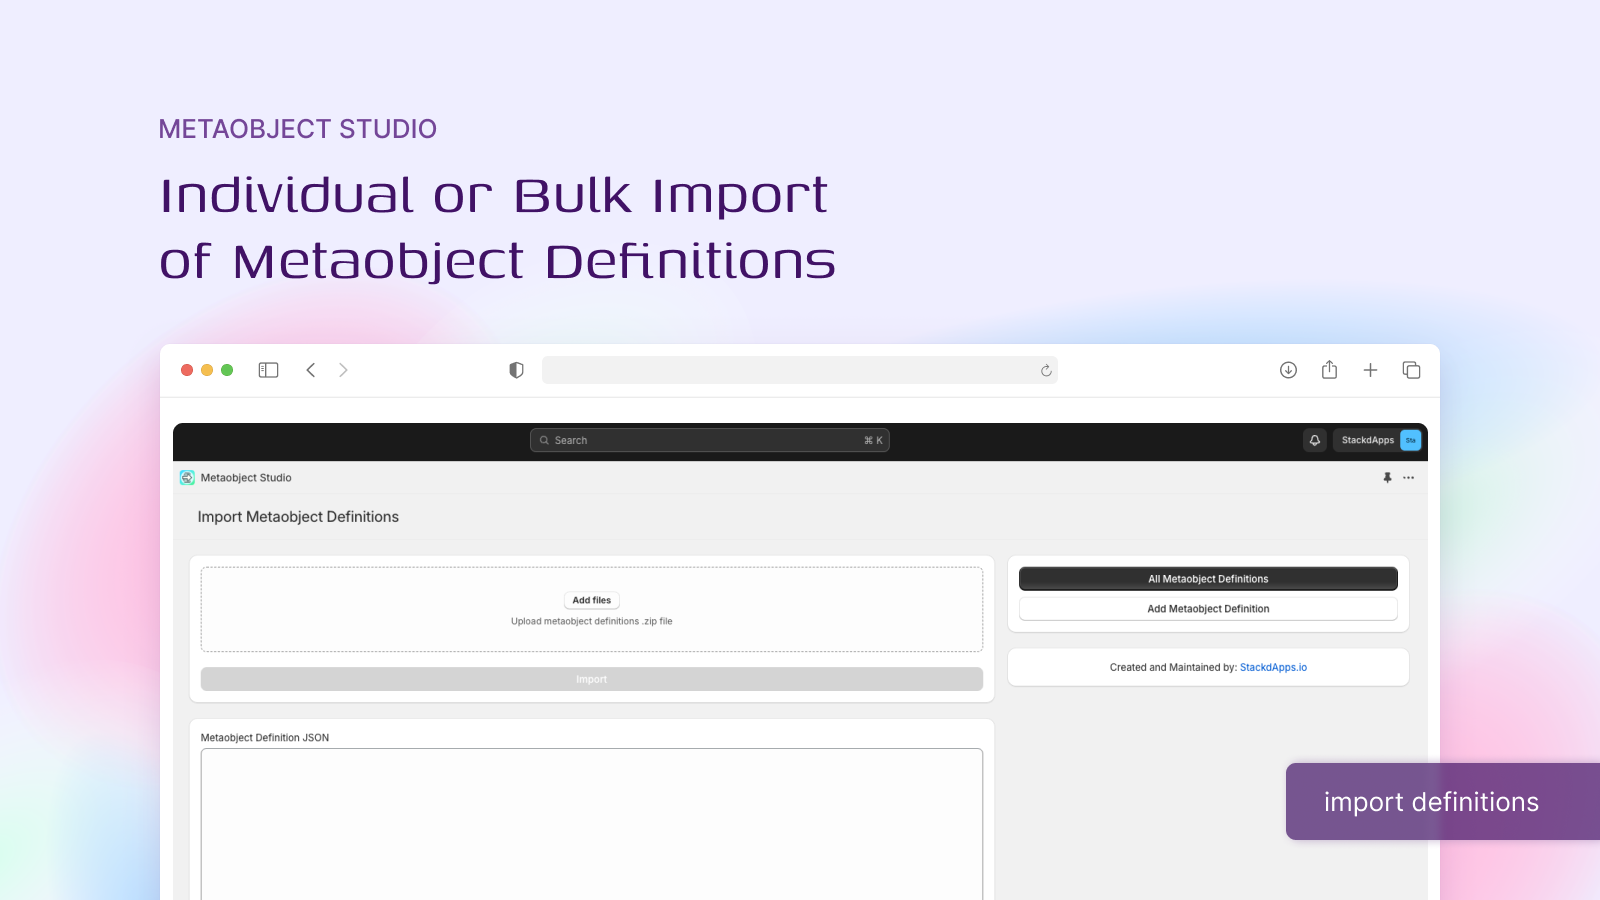 Bulk or Individual Import of Metaobject Definition